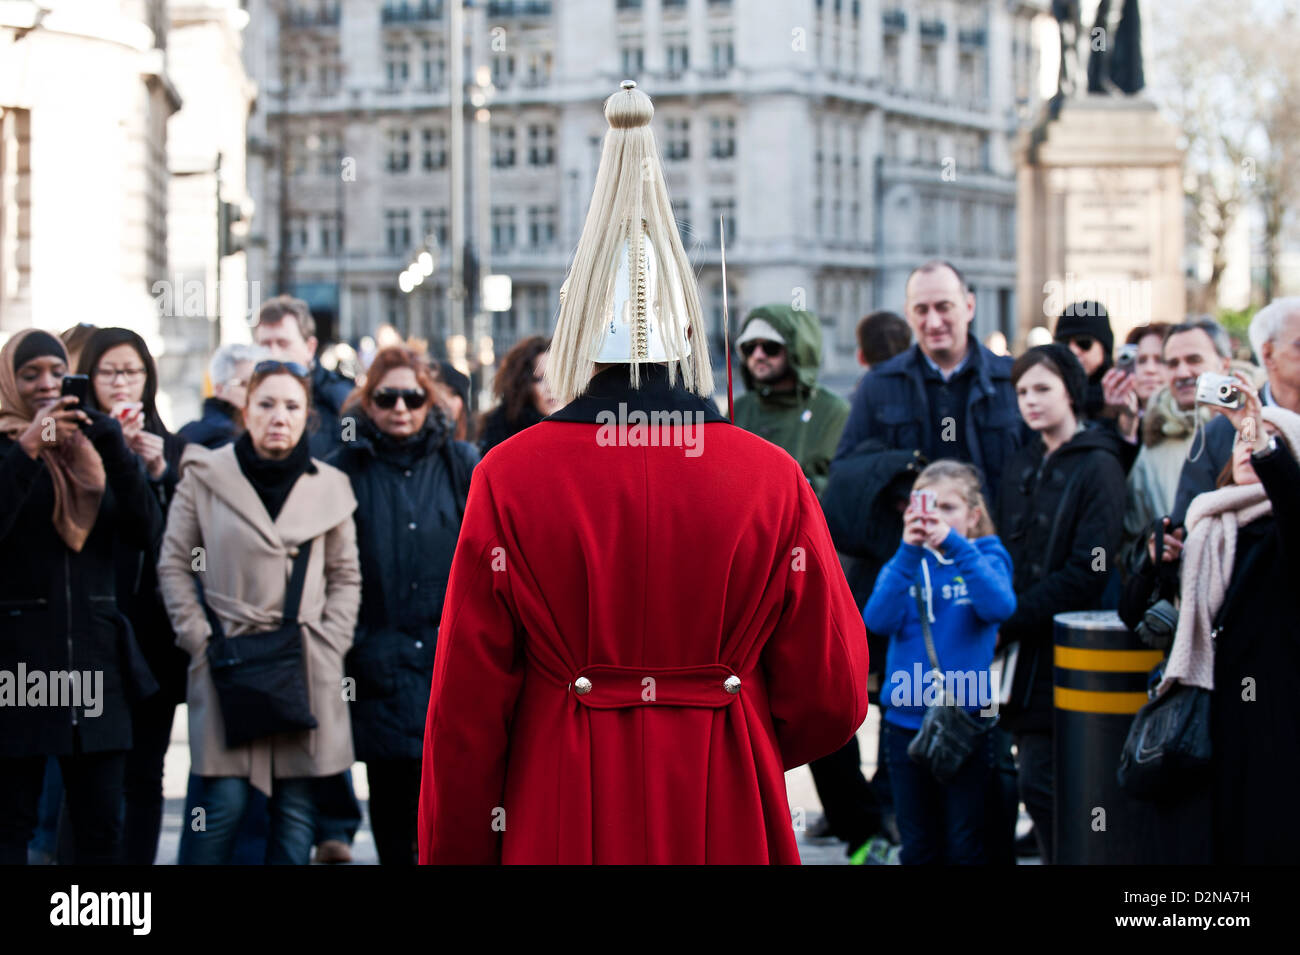 A trooper from the Horse Guards on sentry duty in London Stock Photo